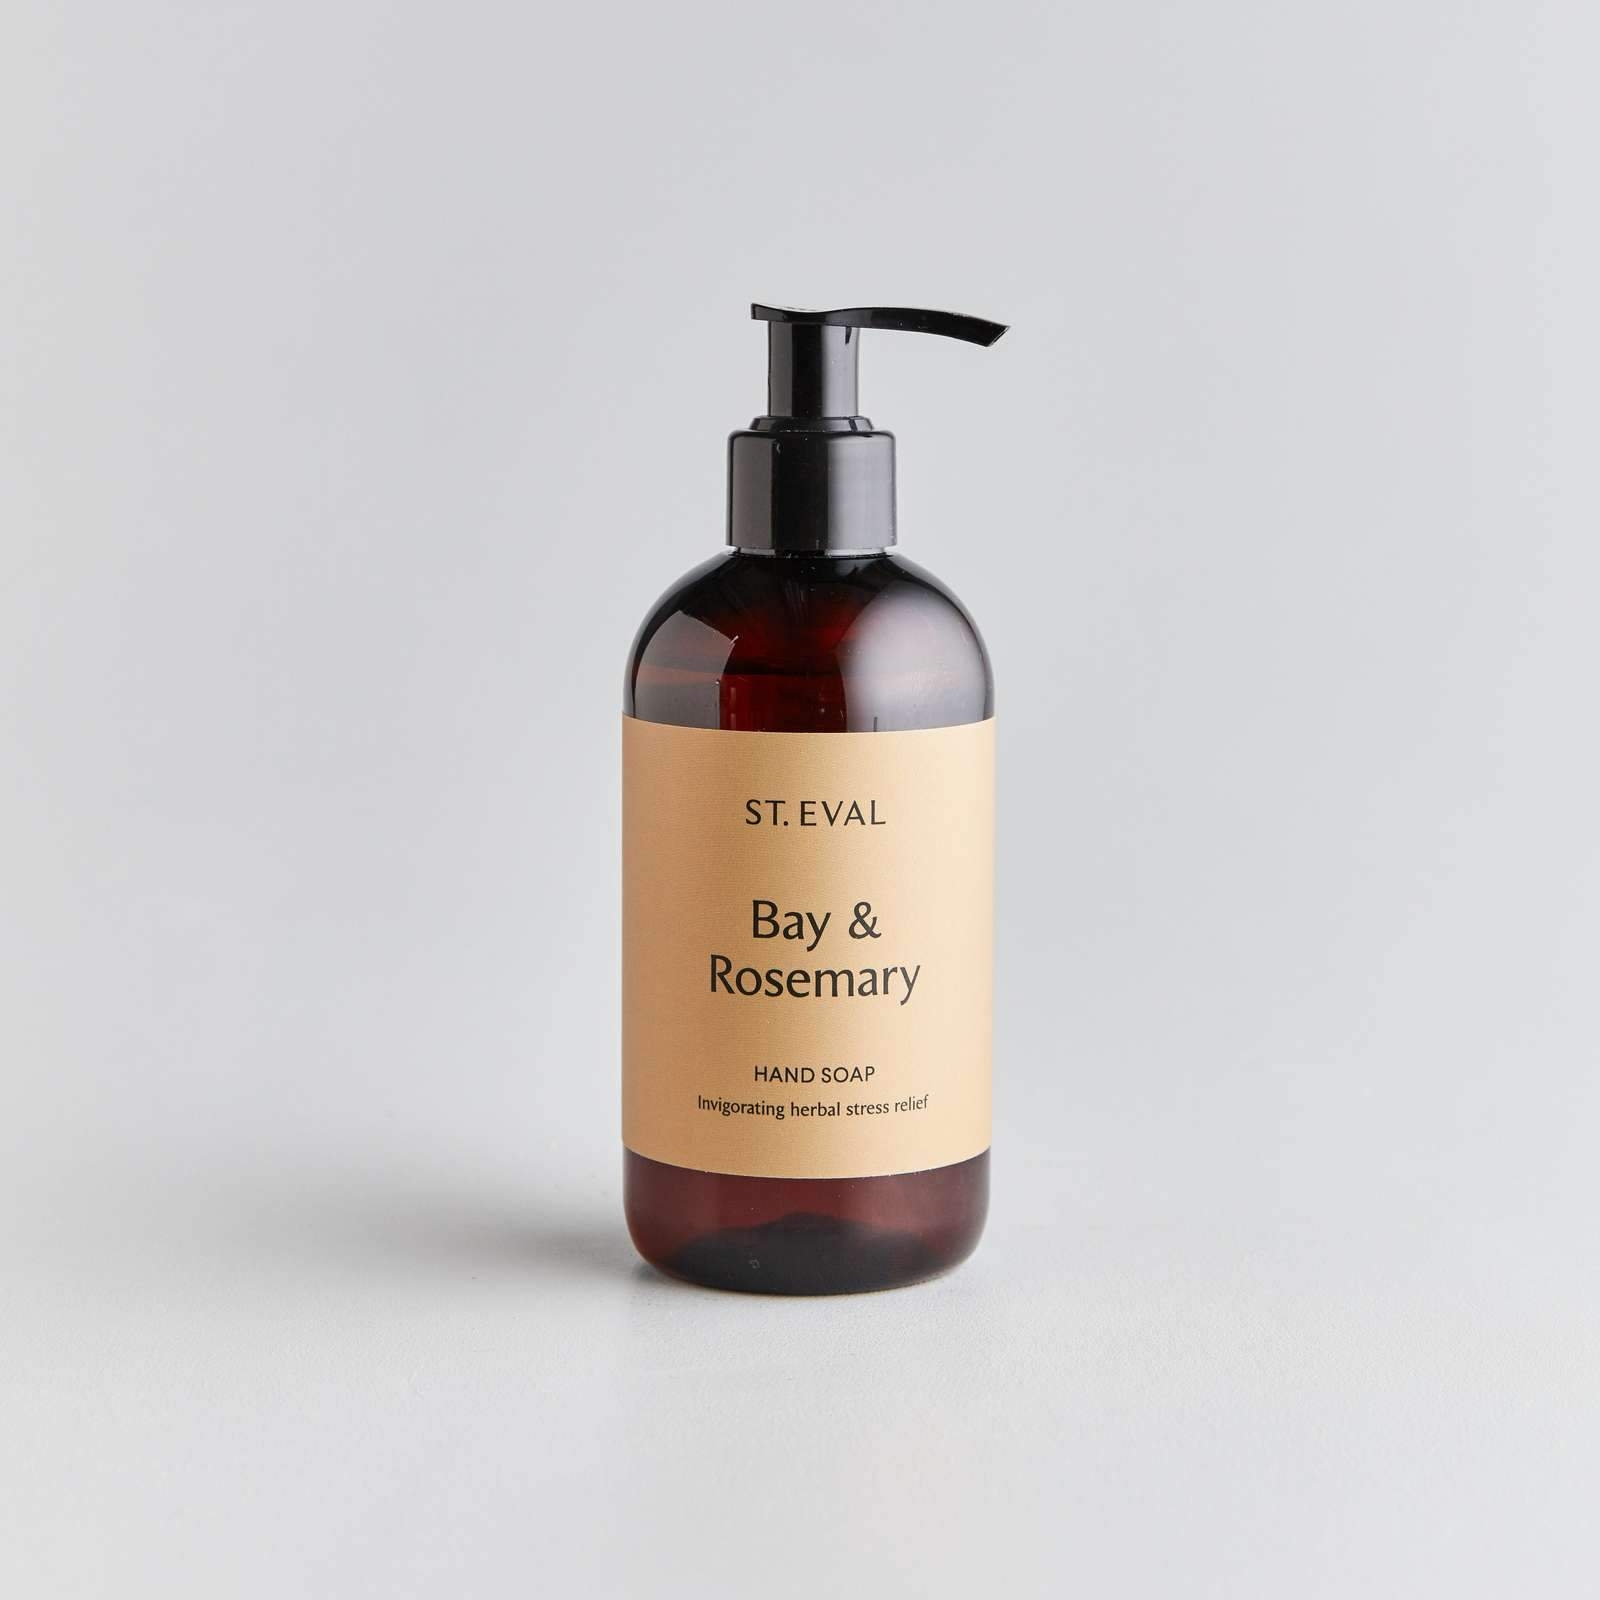 Bay & Rosemary Liquid Hand Soap | St. Eval – St. Eval Candle Company